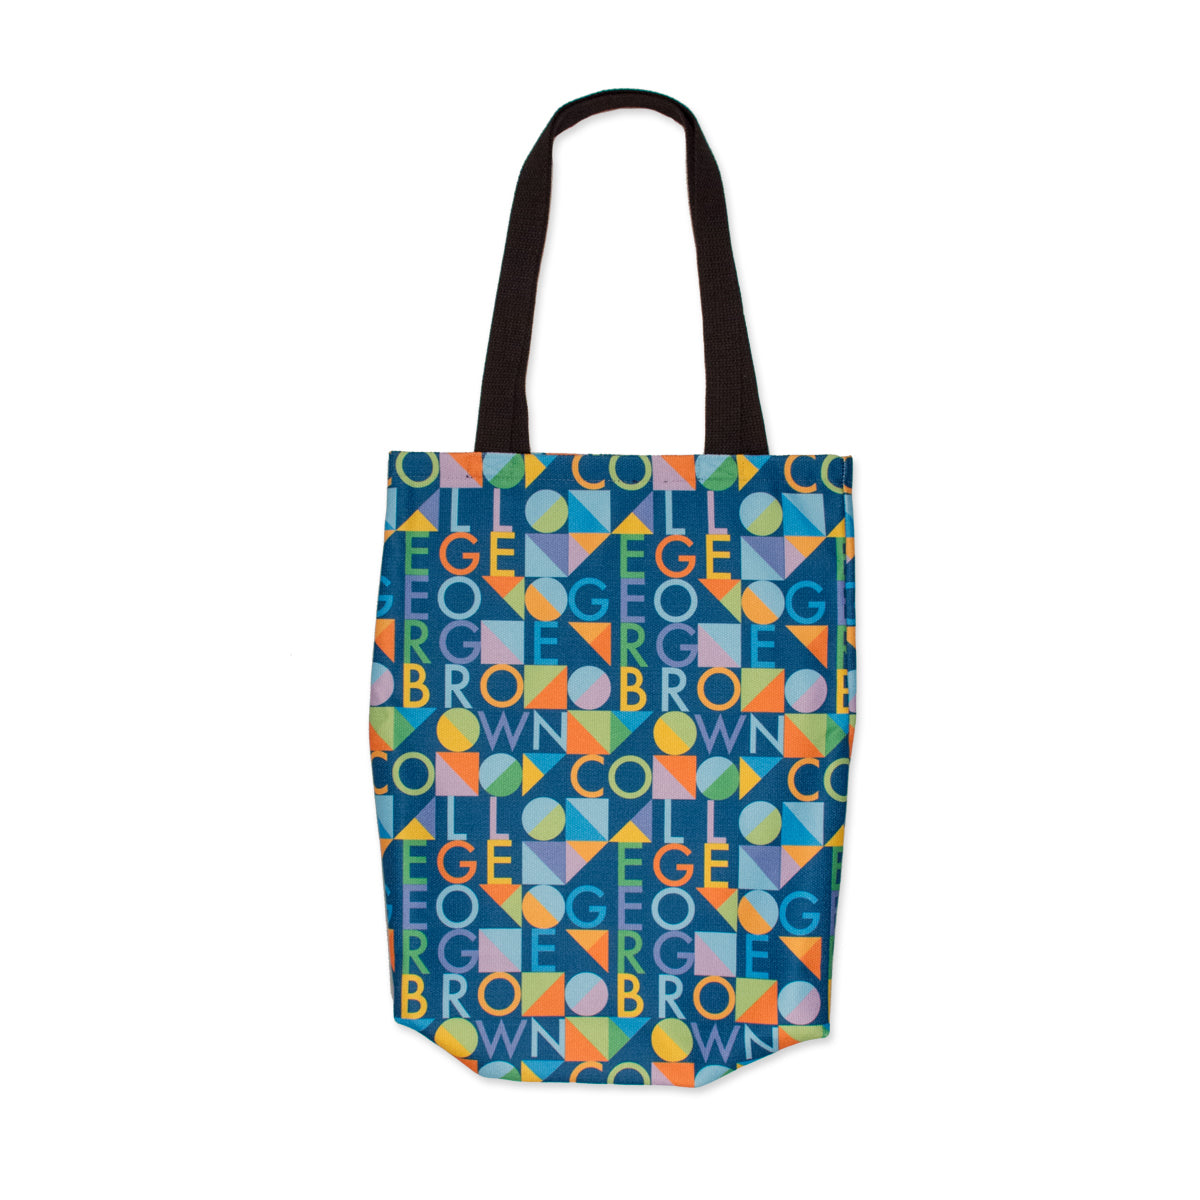 16" x 13" x 3" durable blue polycanvas tote bag with multicoloured george brown college text and geometric shape pattern